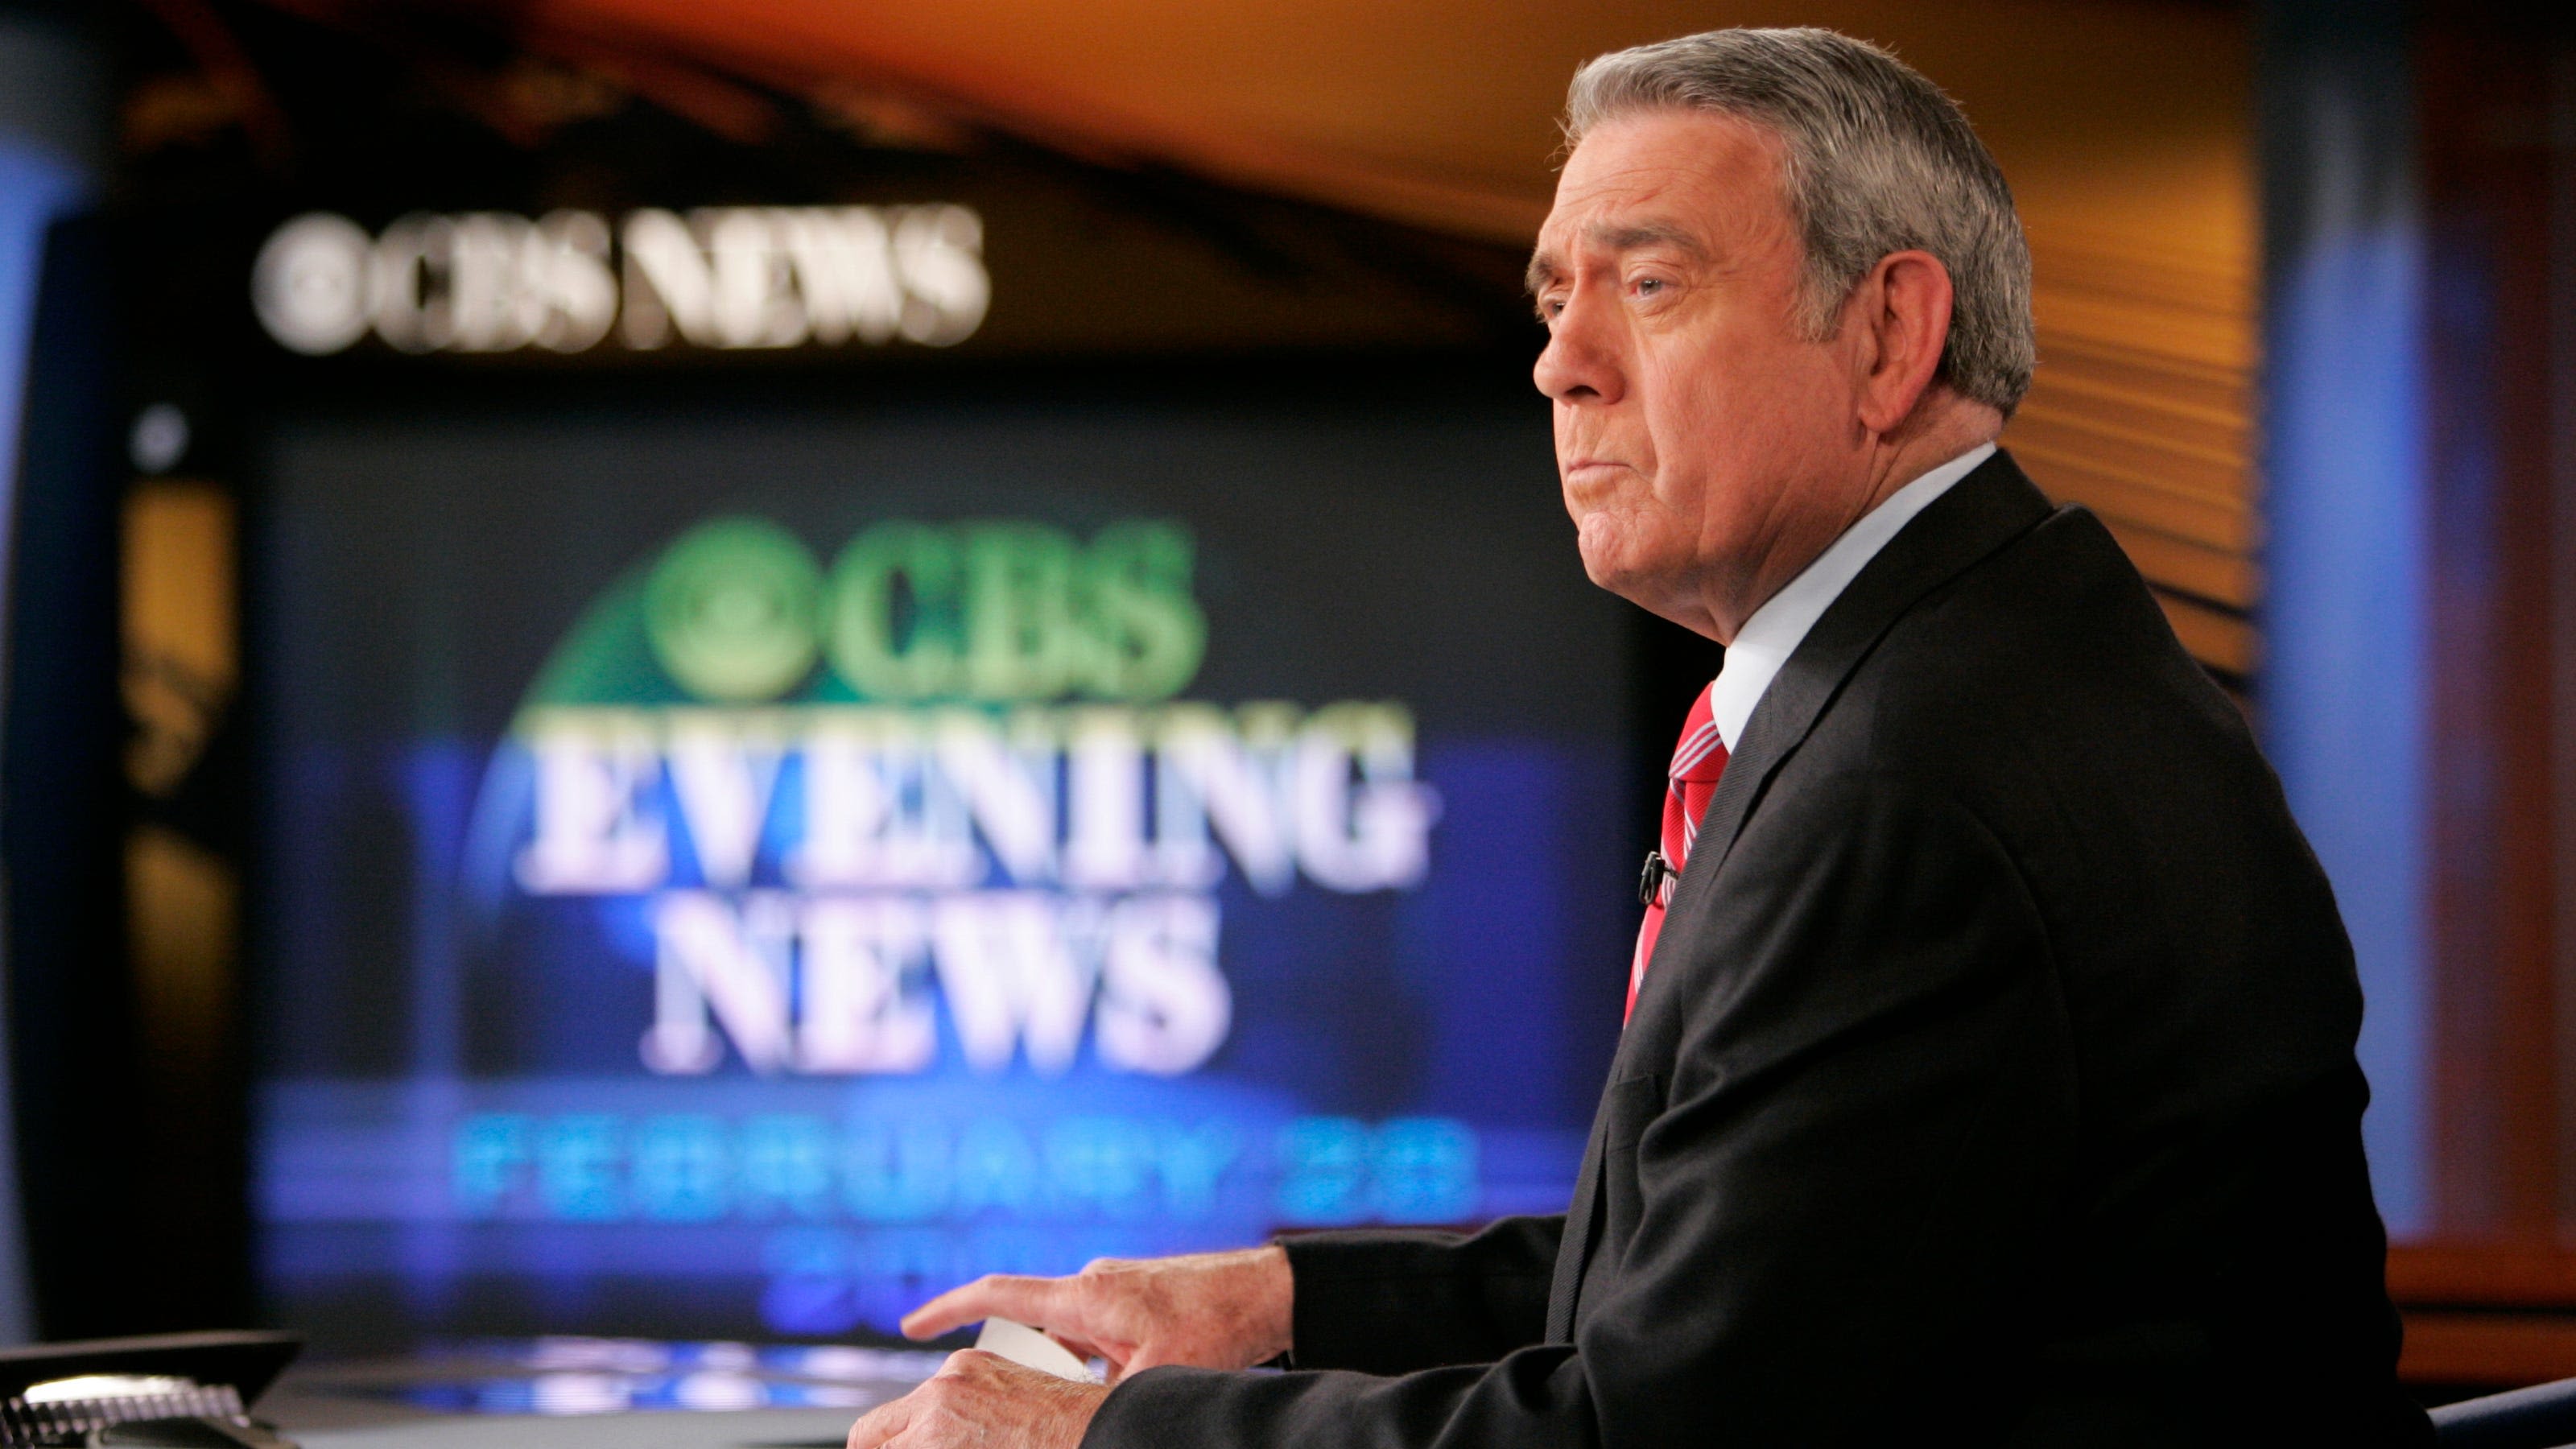 Dan Rather returns to CBS News for first time since 2005. Here's why